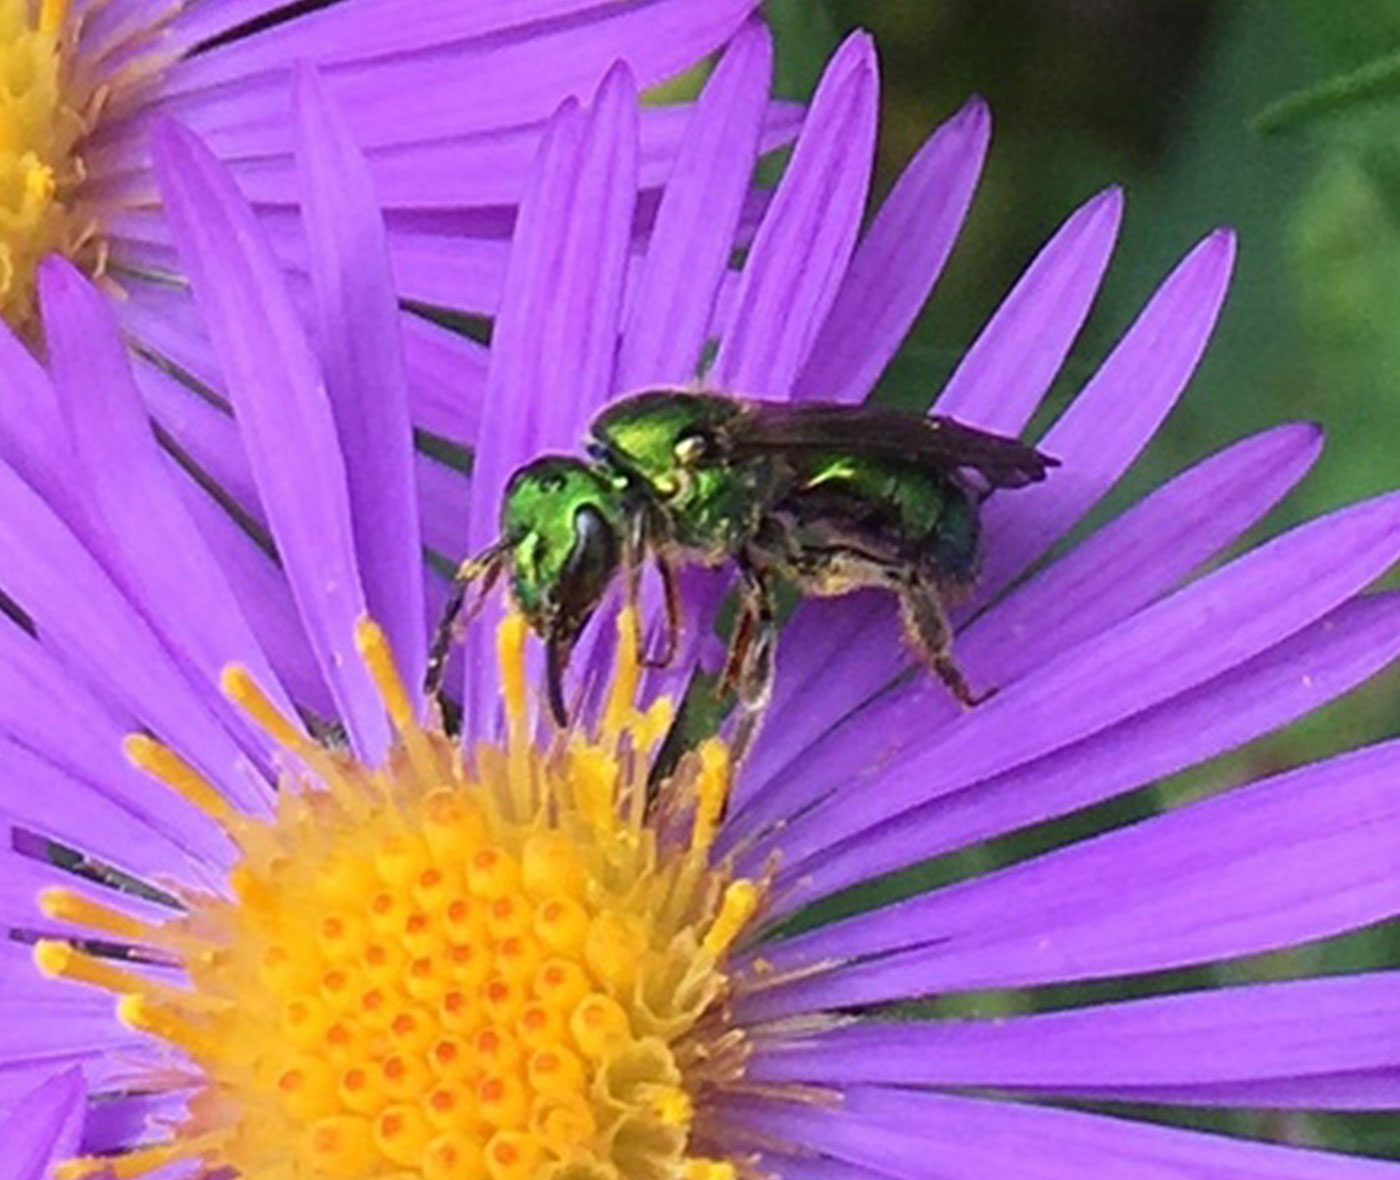 Close up of a sweat bee on a New England aster